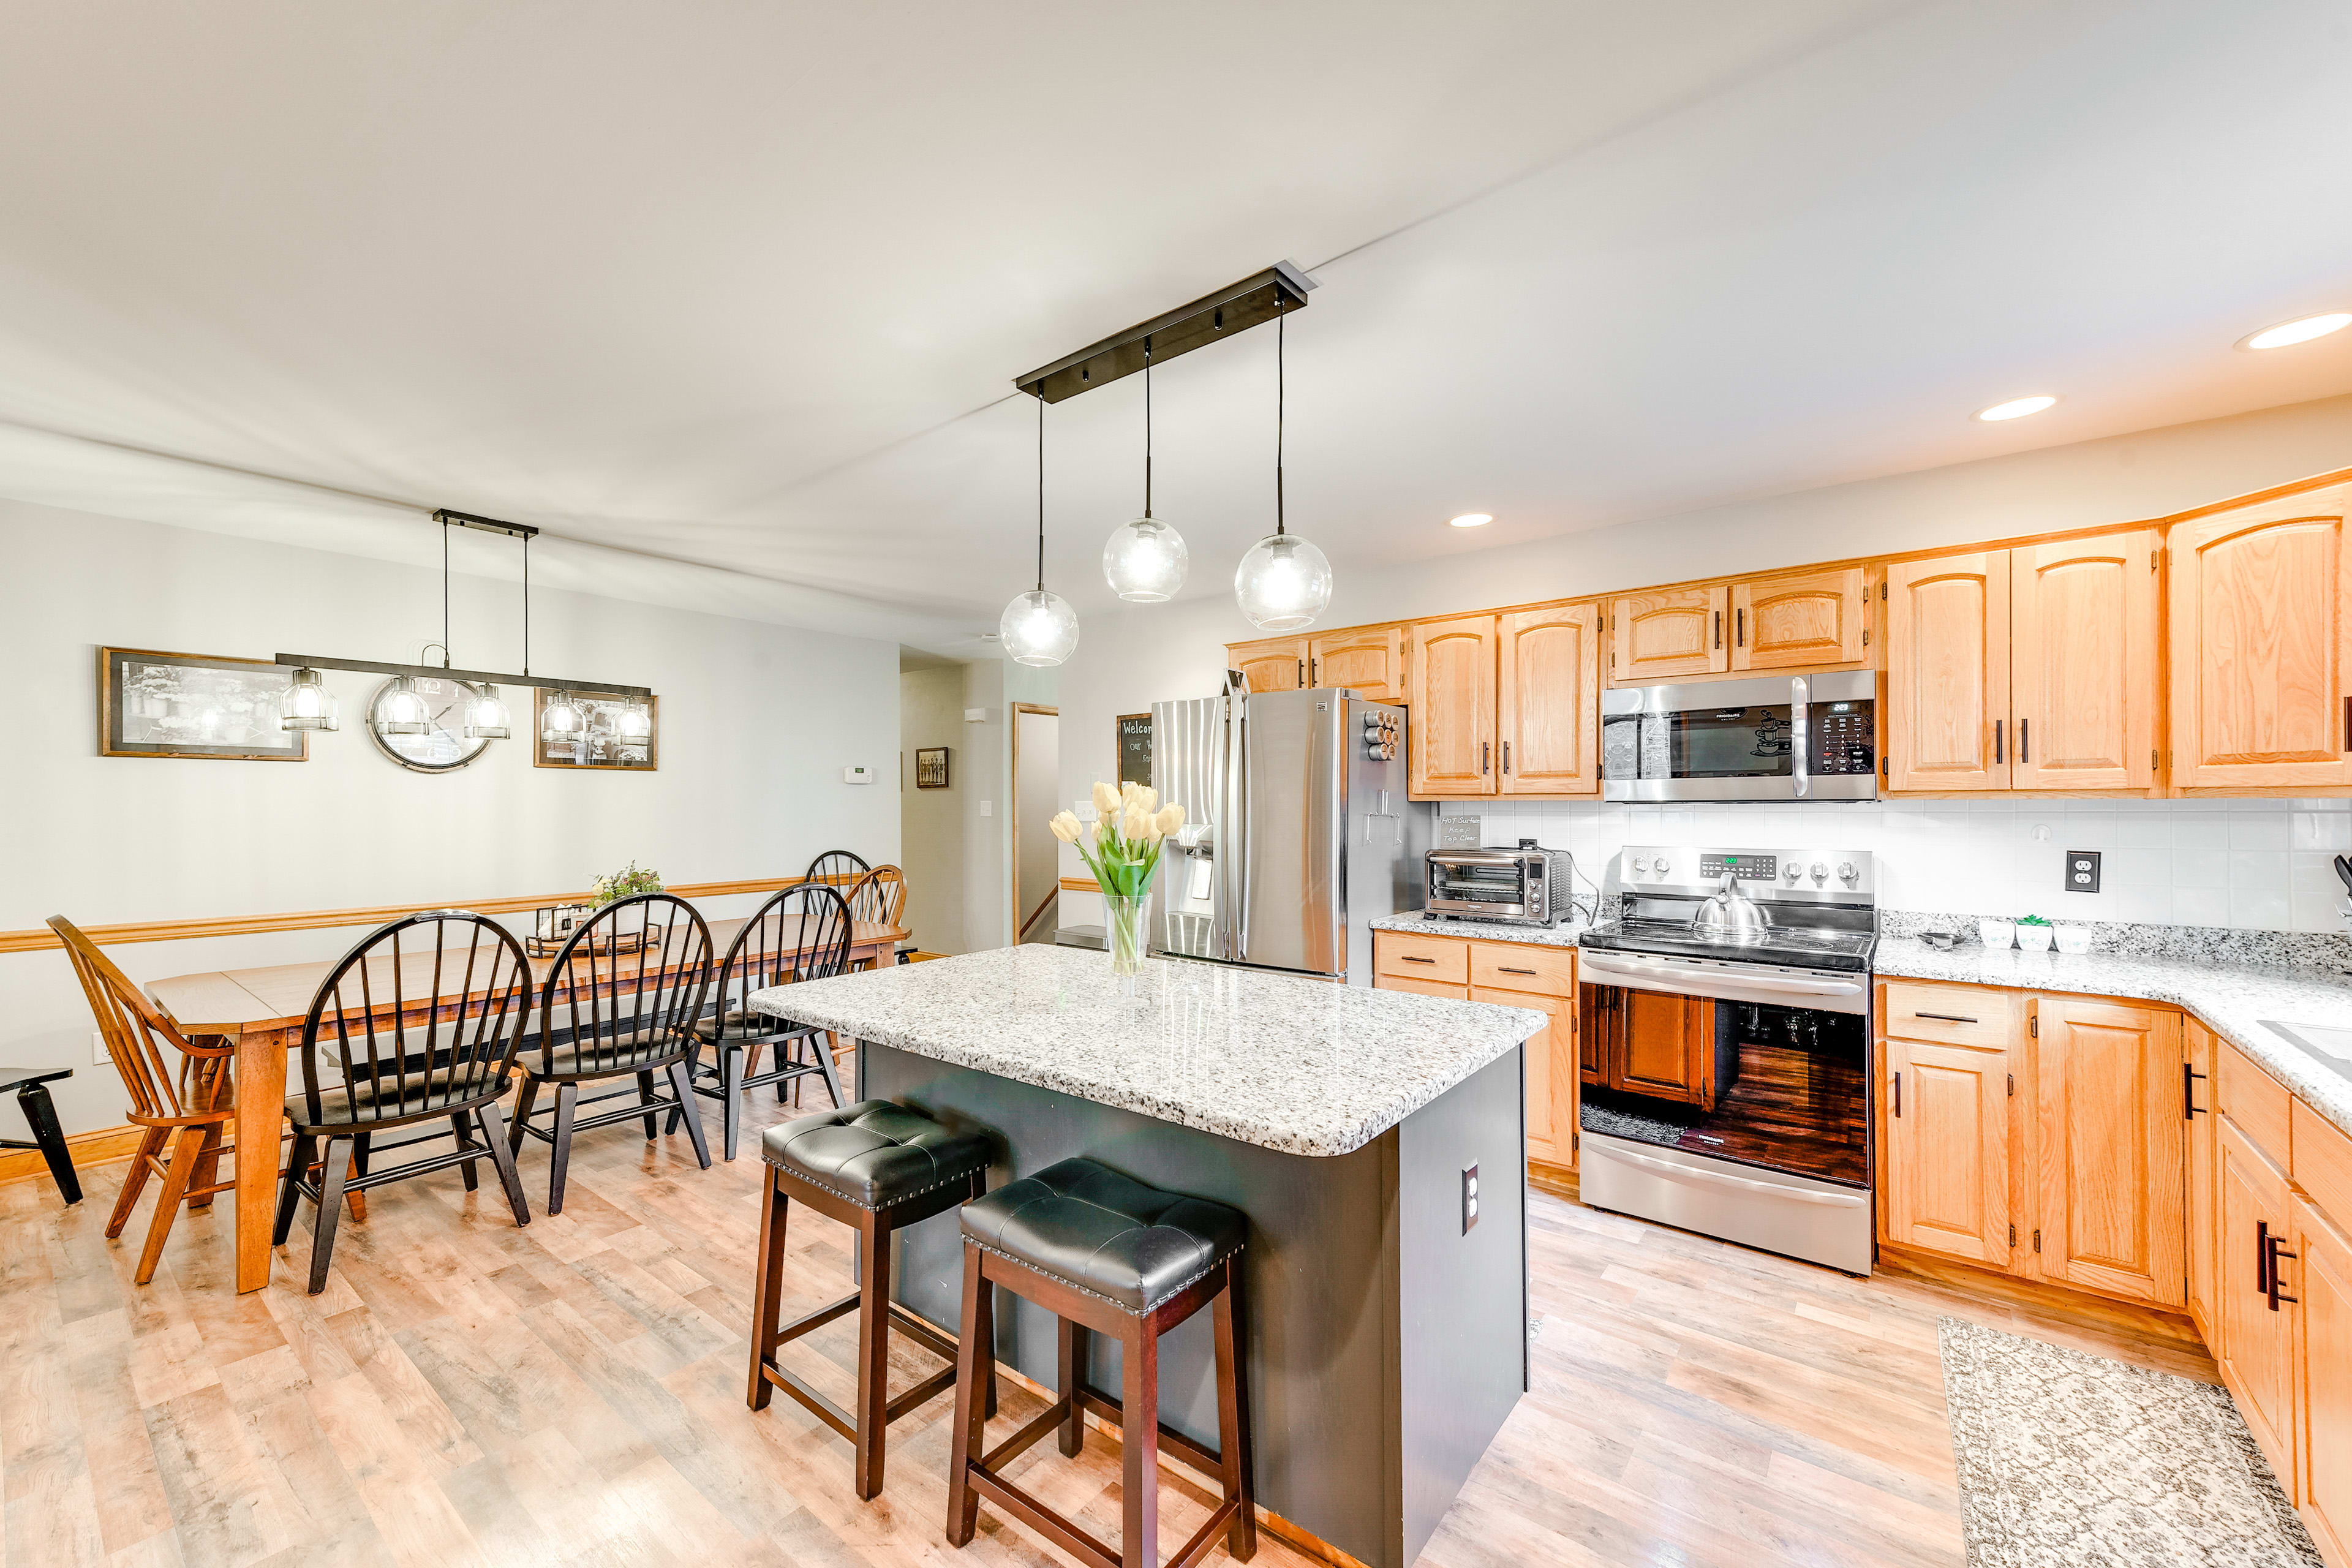 Kitchen | Cooking Basics | Toaster Oven | Kettle | Coffee Bar | Main Level